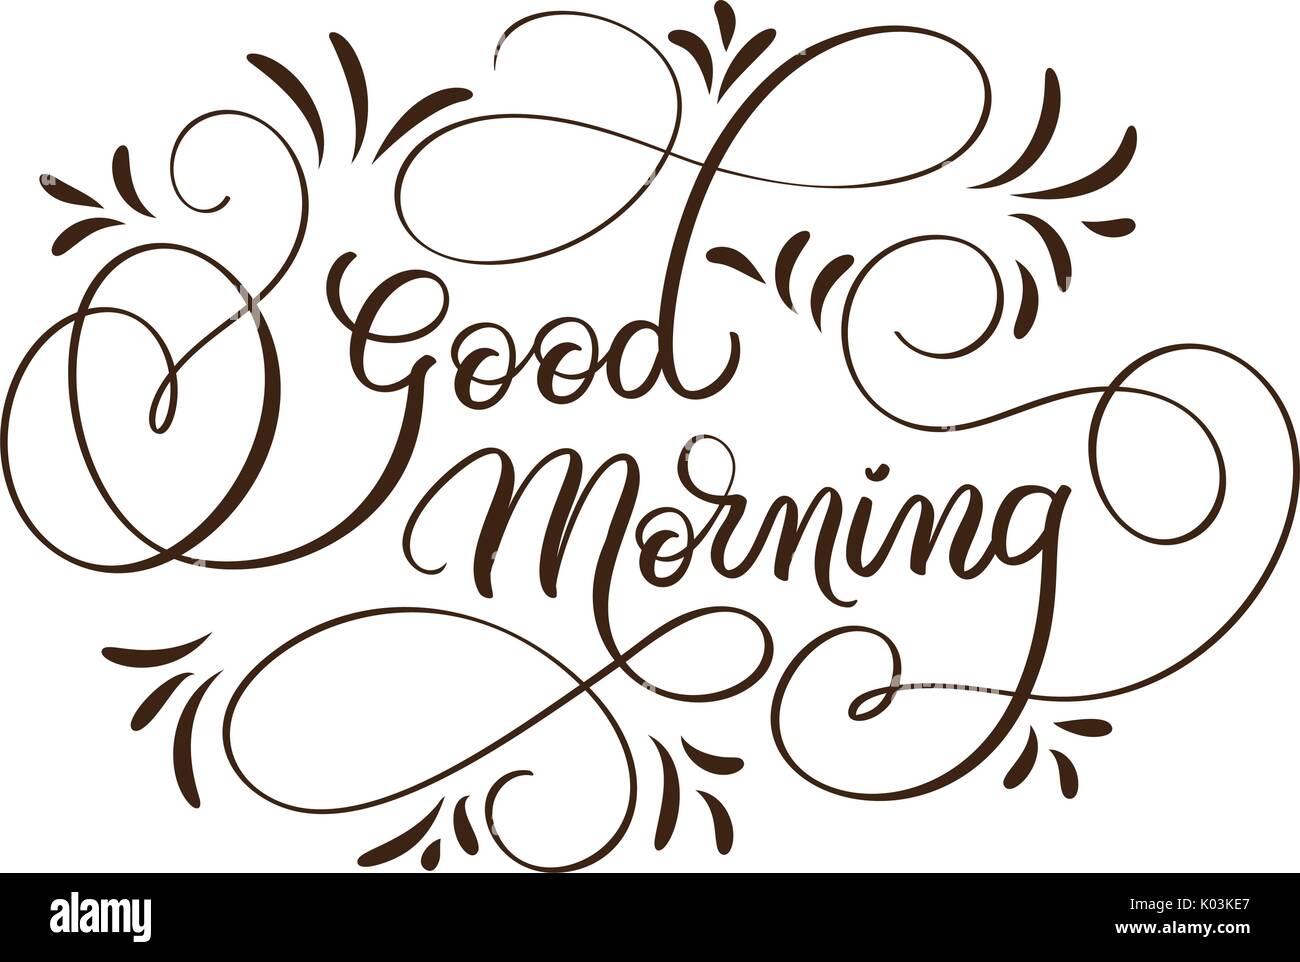 Good morning text on white background. Hand drawn Calligraphy lettering ...